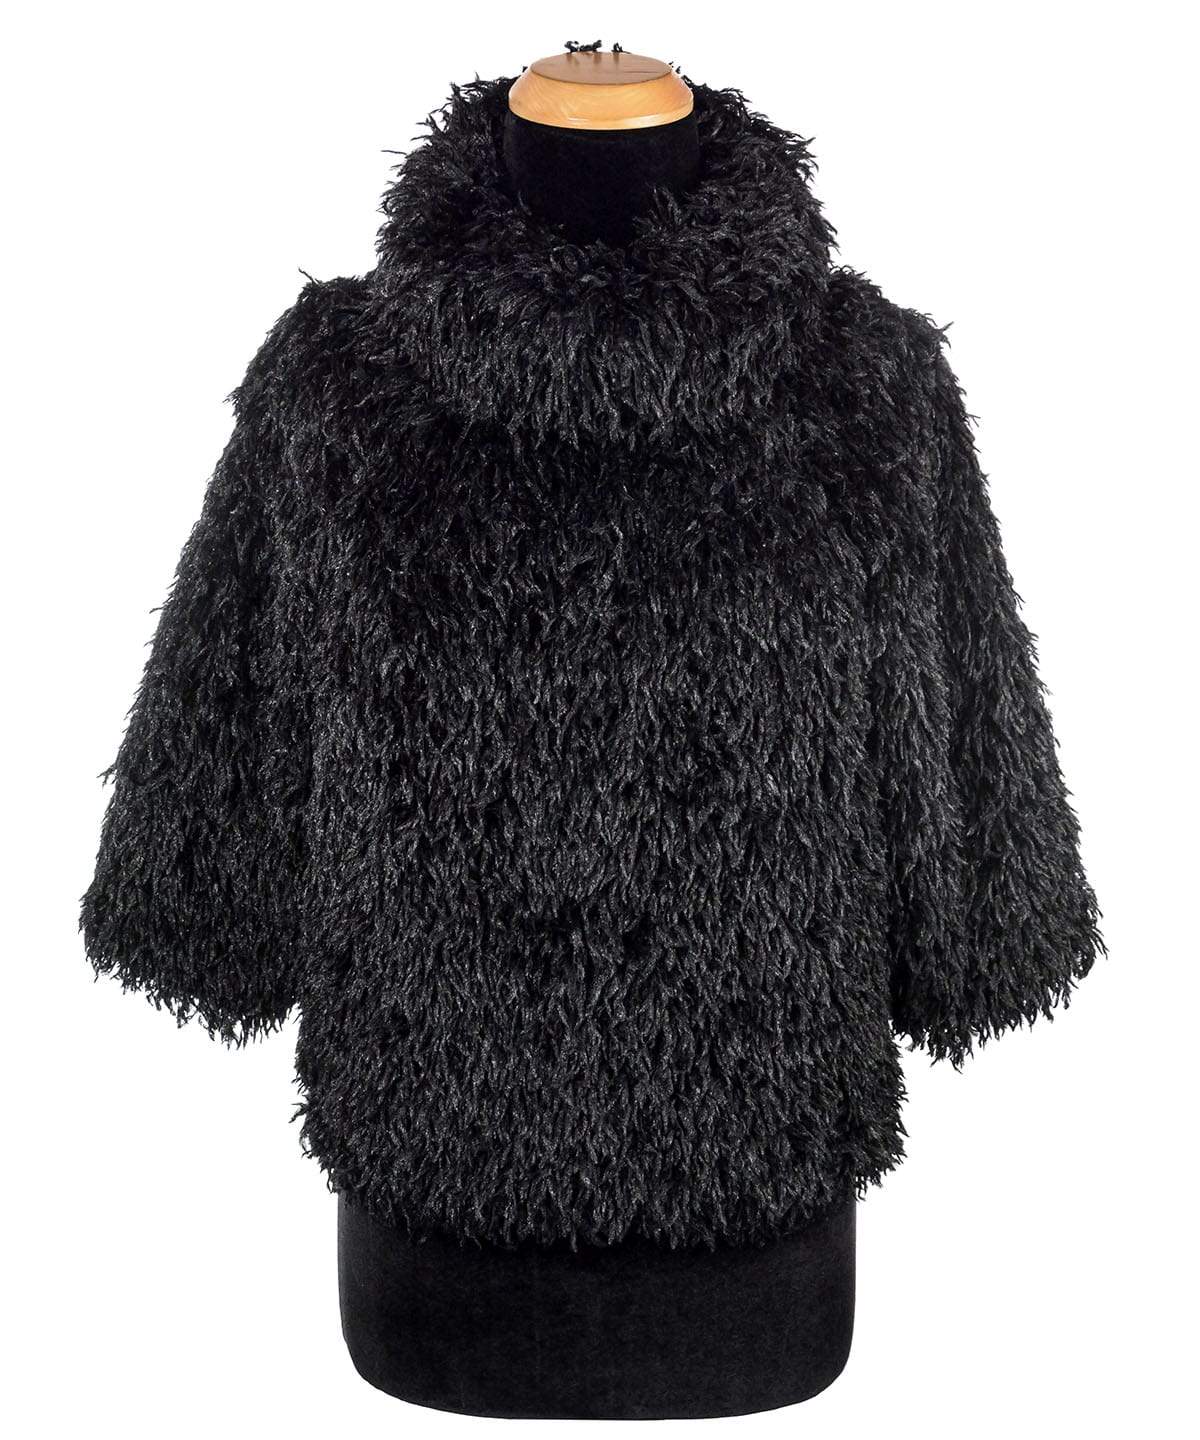 Sweater Top - Black Swan Faux Feather